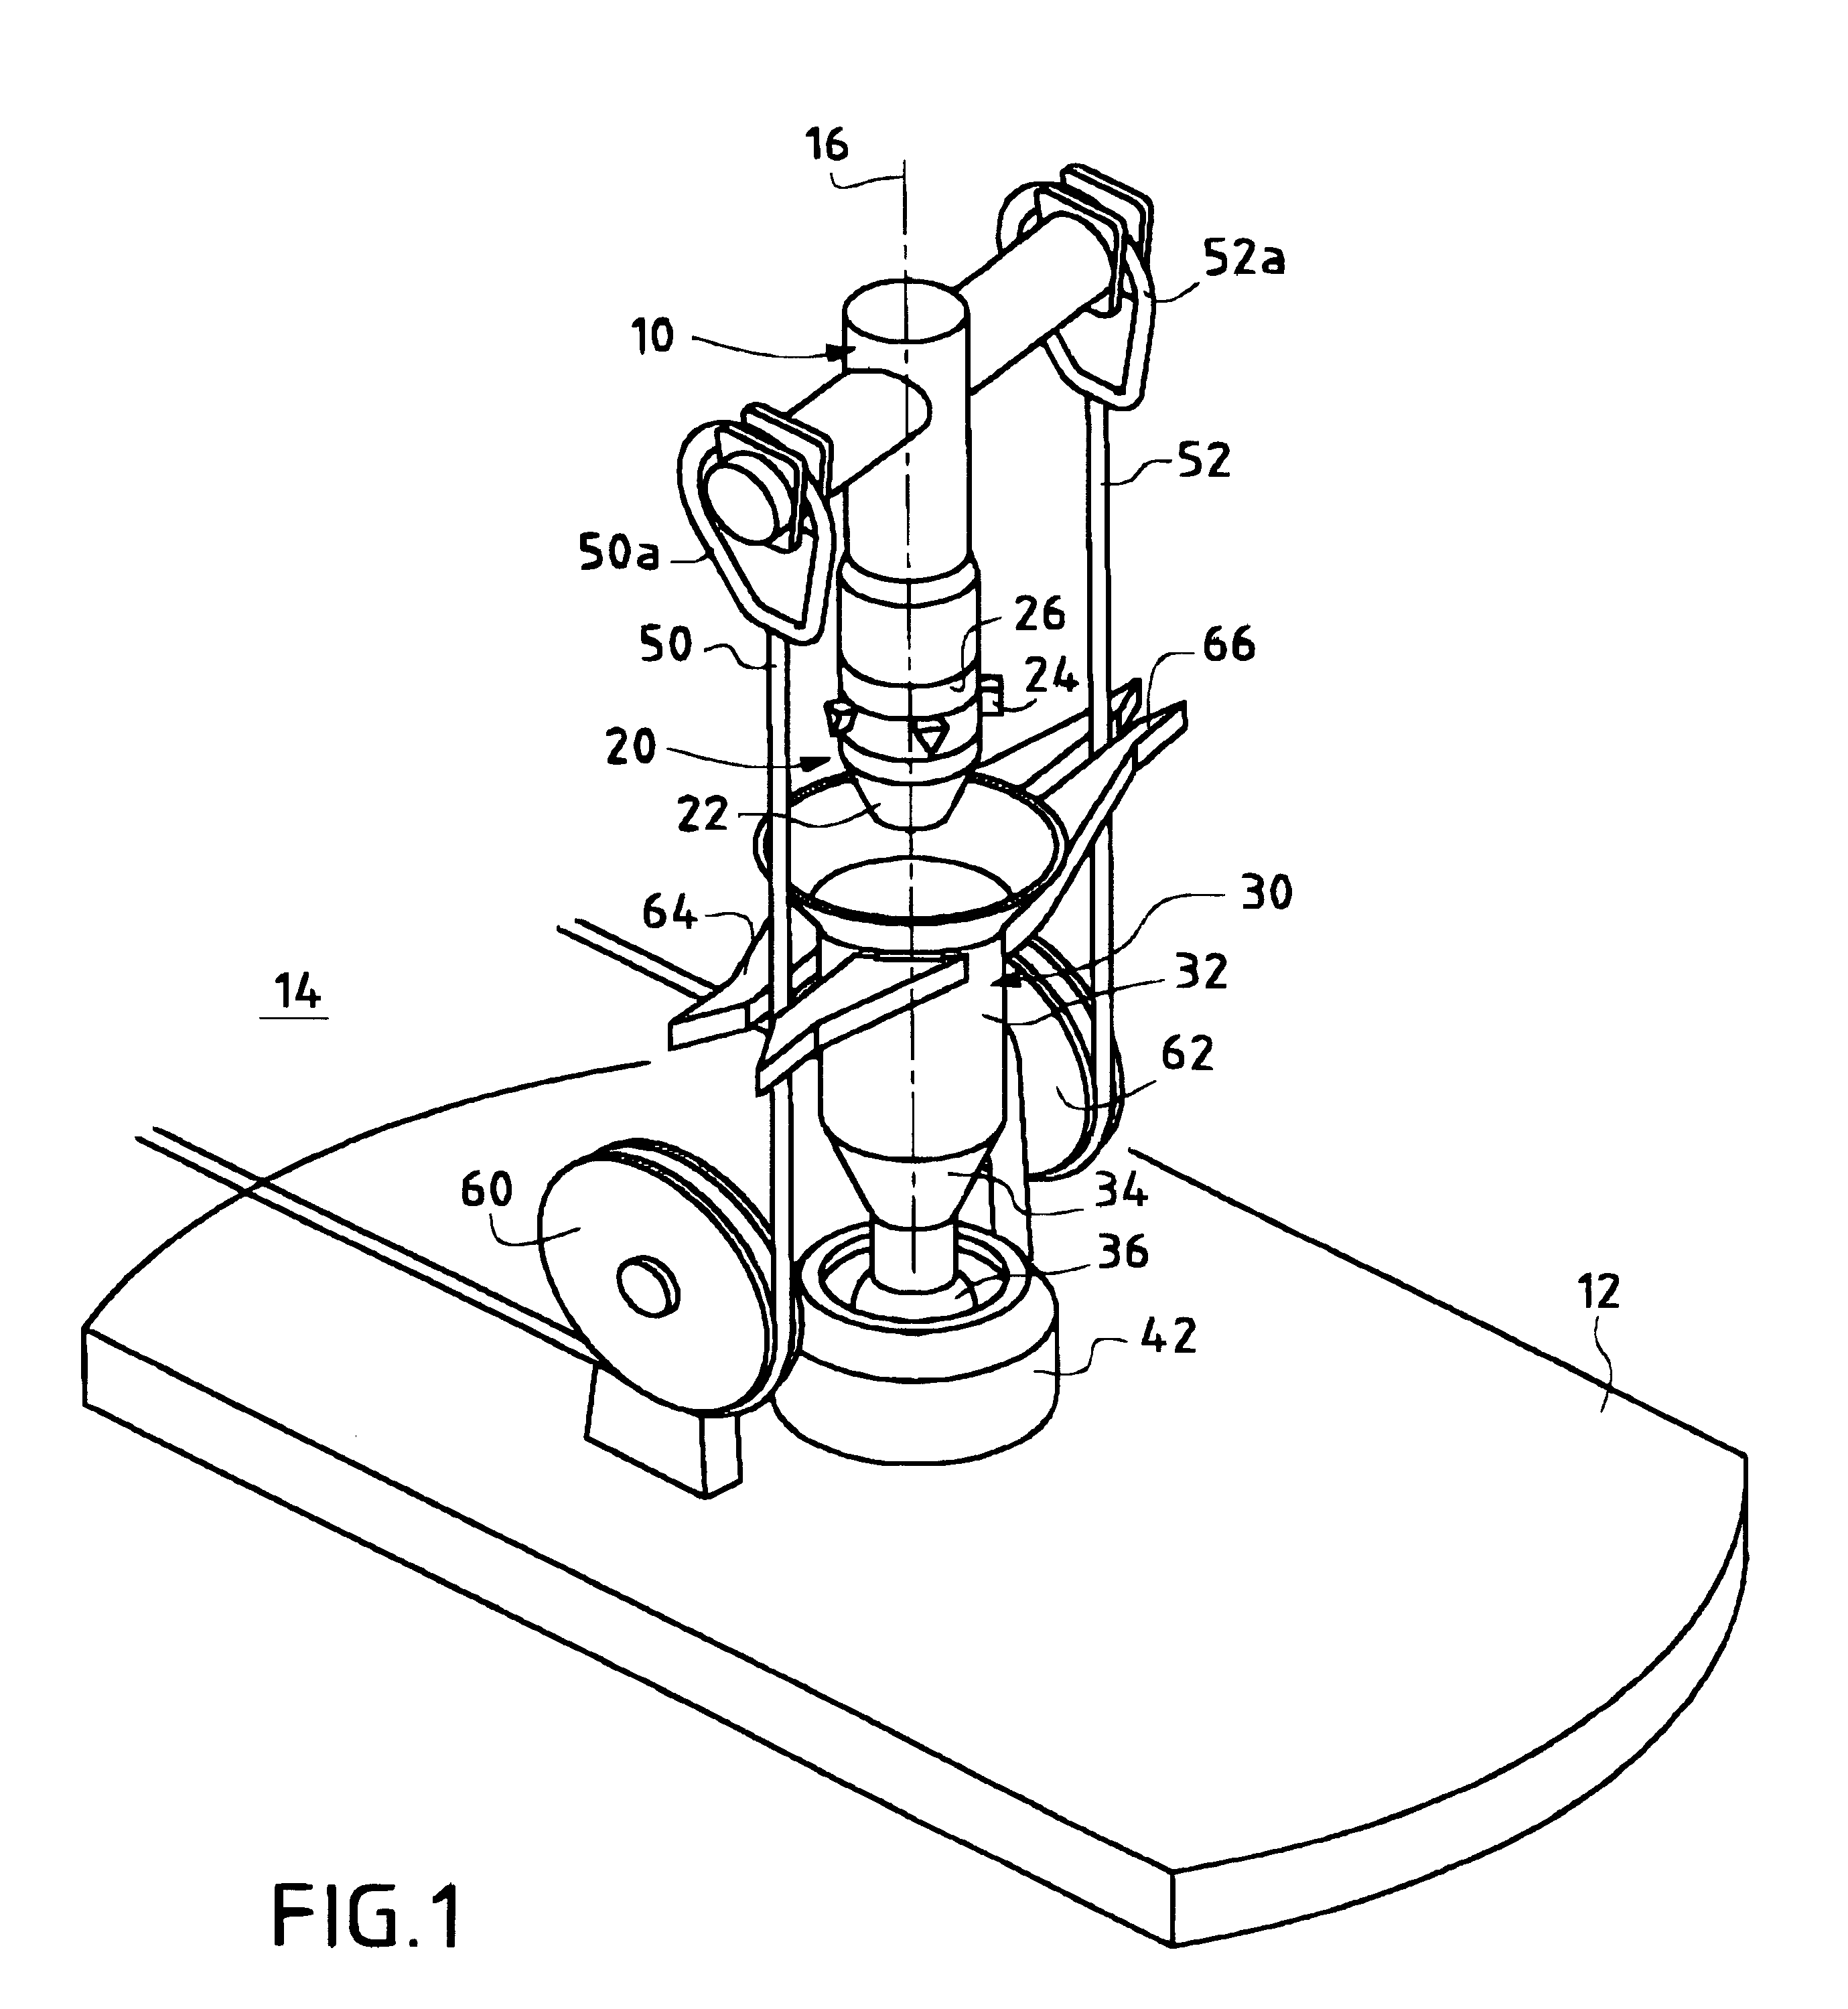 Apparatus for securing a tubular structure to an anchor